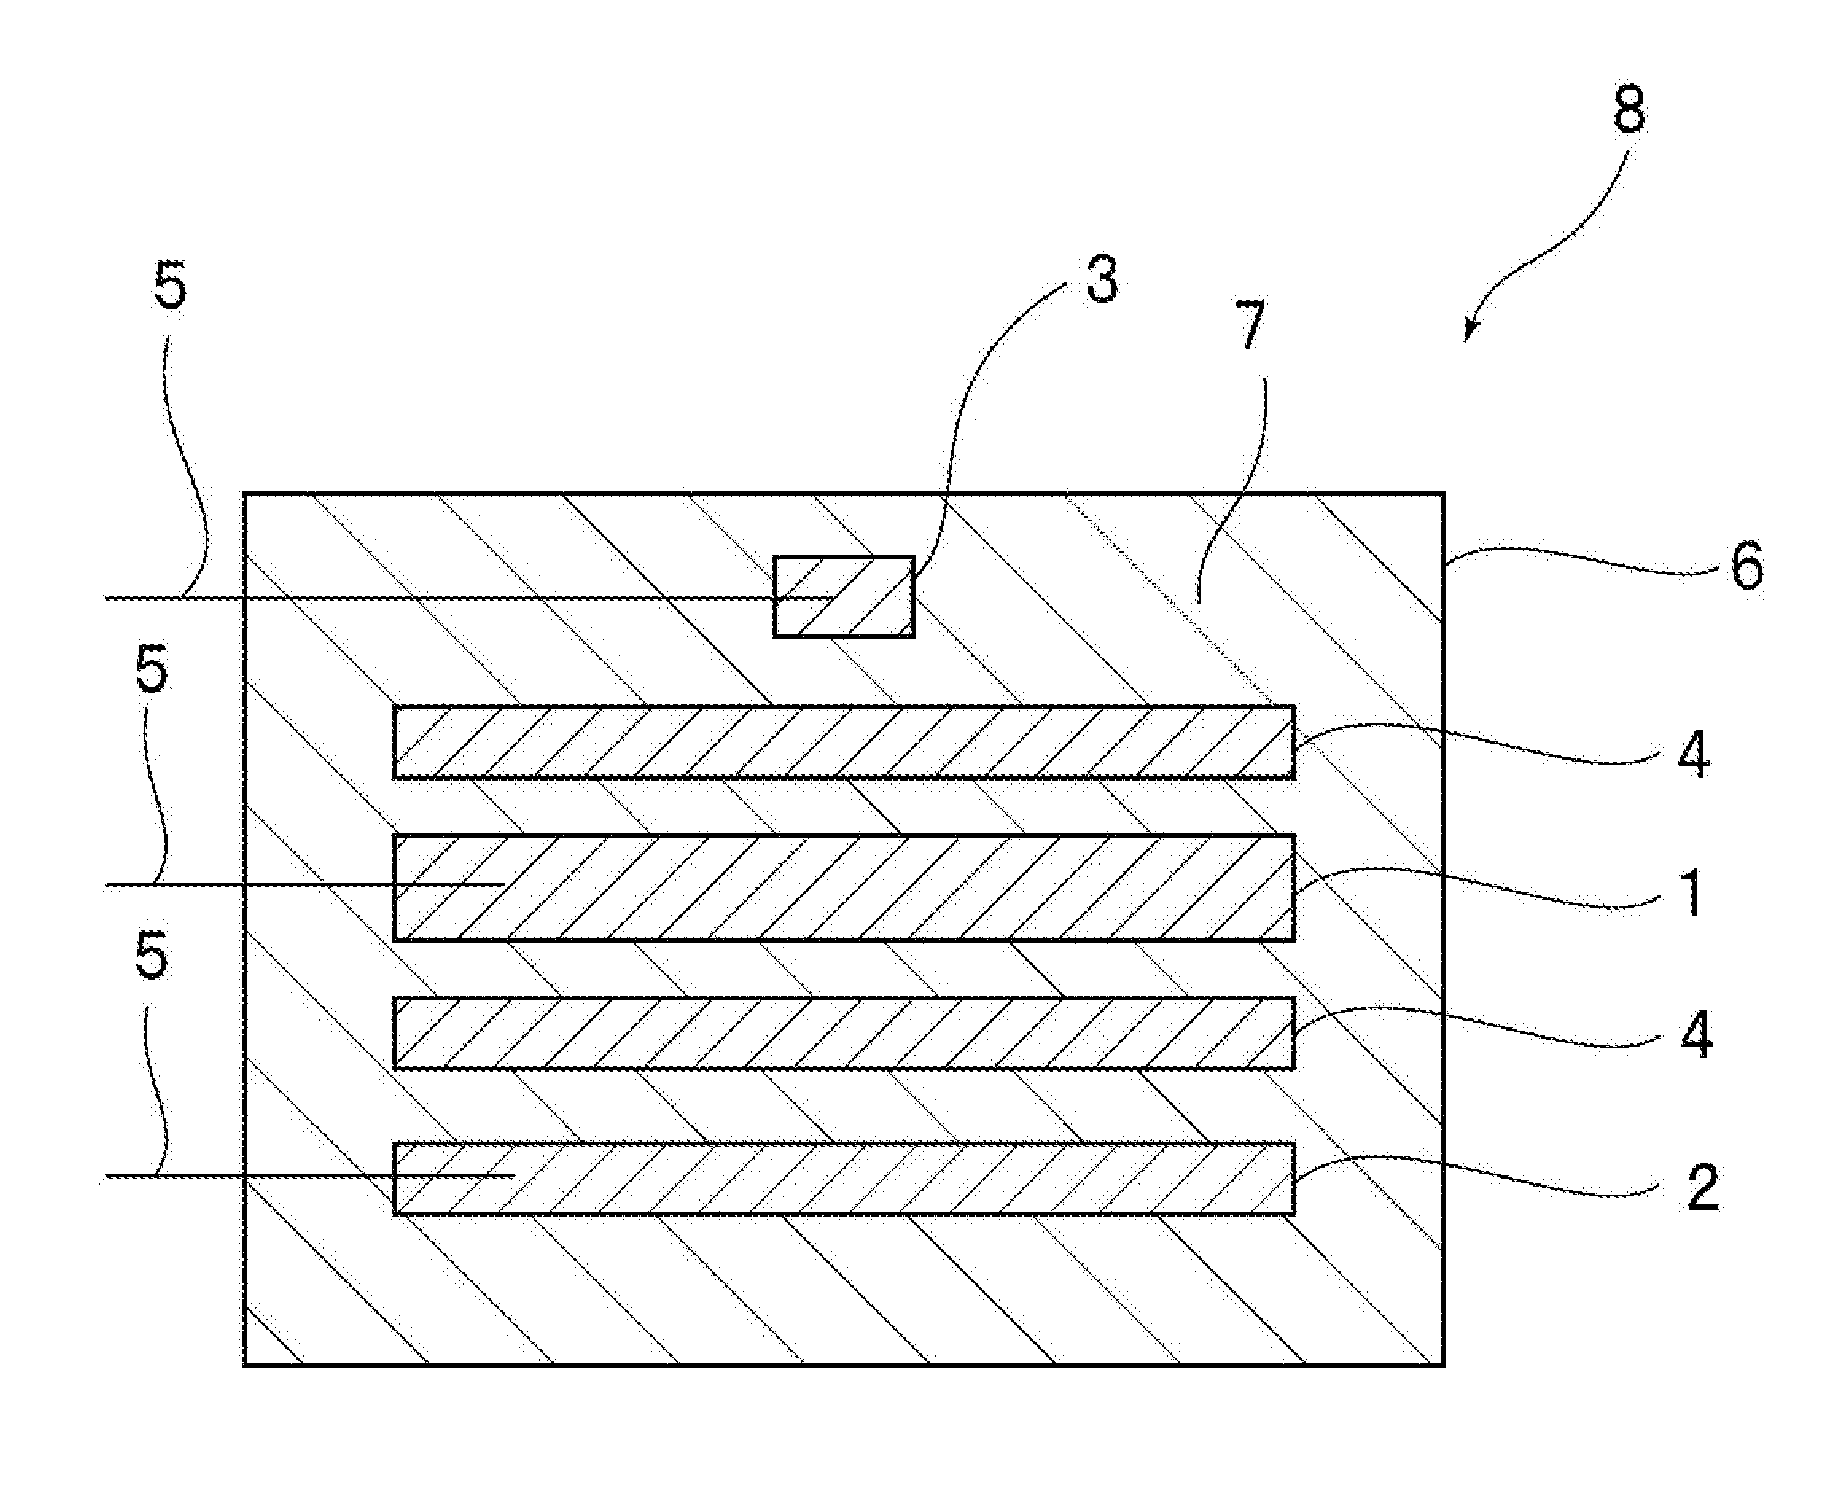 Non-aqueous electrolyte secondary battery and method of manufacturing the same